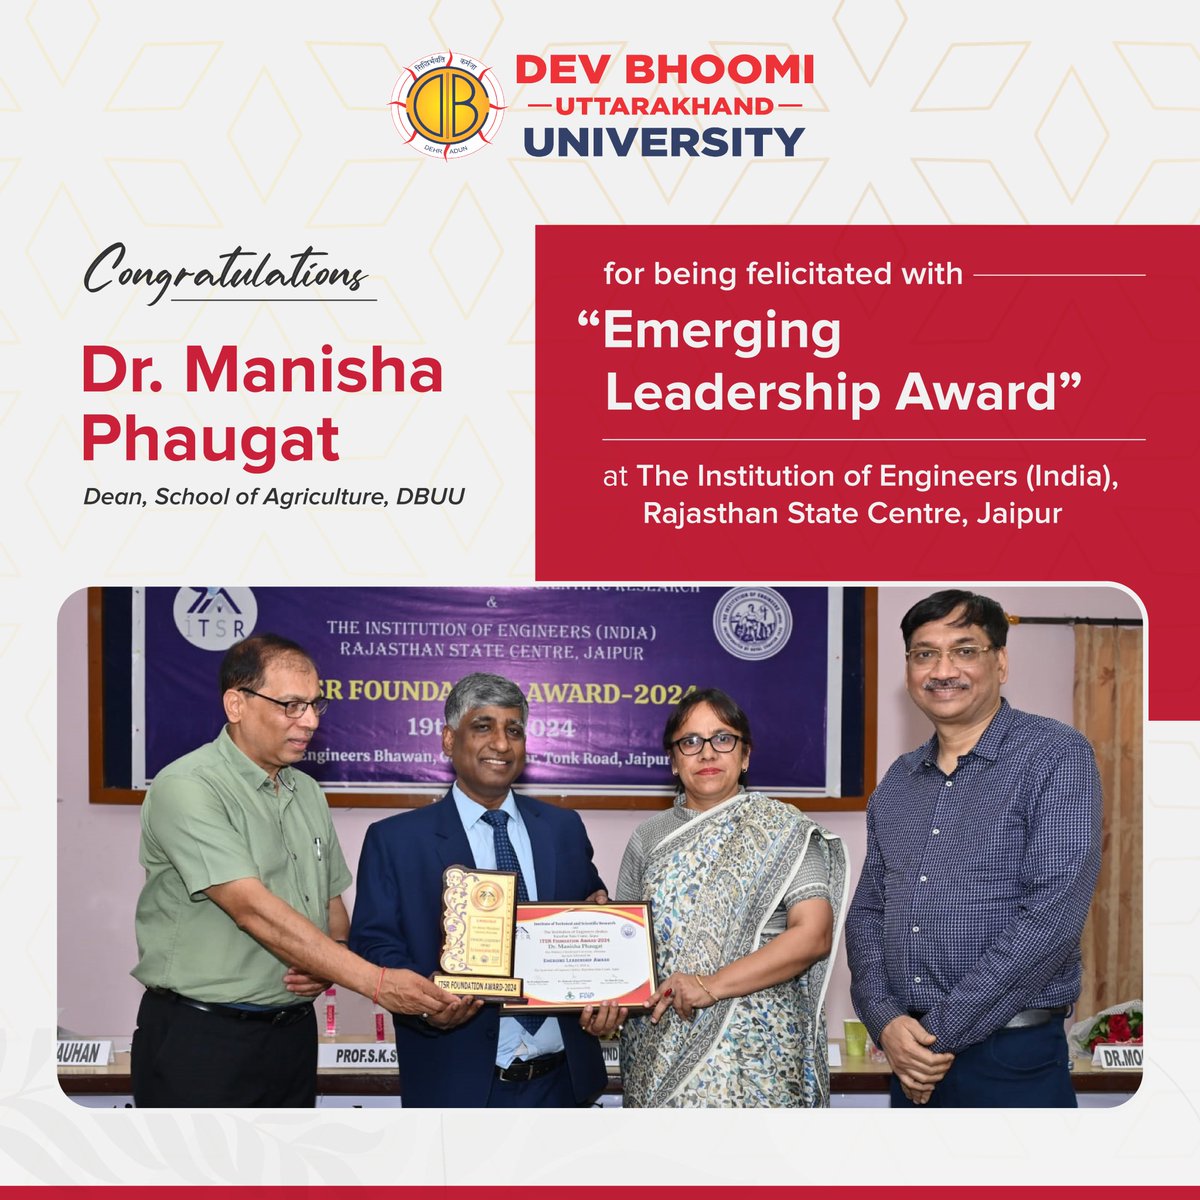 Celebrating #Excellence!

Heartfelt #congratulations to Dr. Manisha Phaugat, our esteemed Dean of the School of #Agriculture at #DBUU, for being #honored with the Emerging #Leadership Award at The Institution of #Engineers (India), Rajasthan State Centre, #Jaipur!